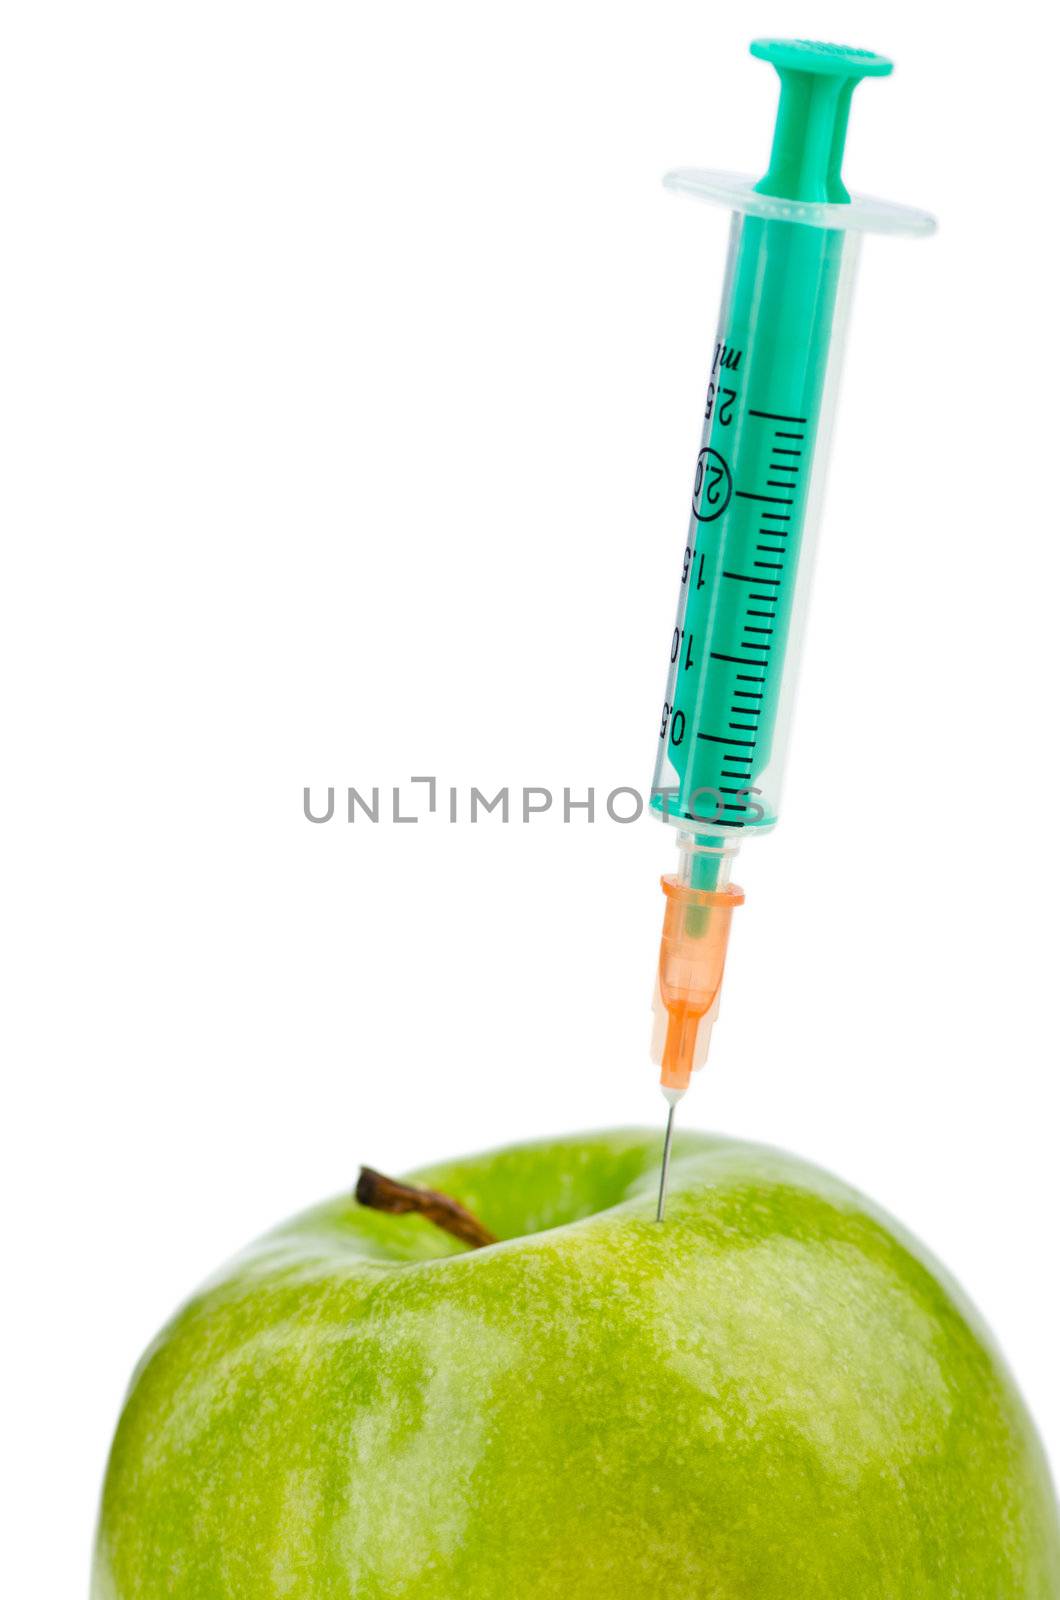 Experiment with apple and syringes by Elnur